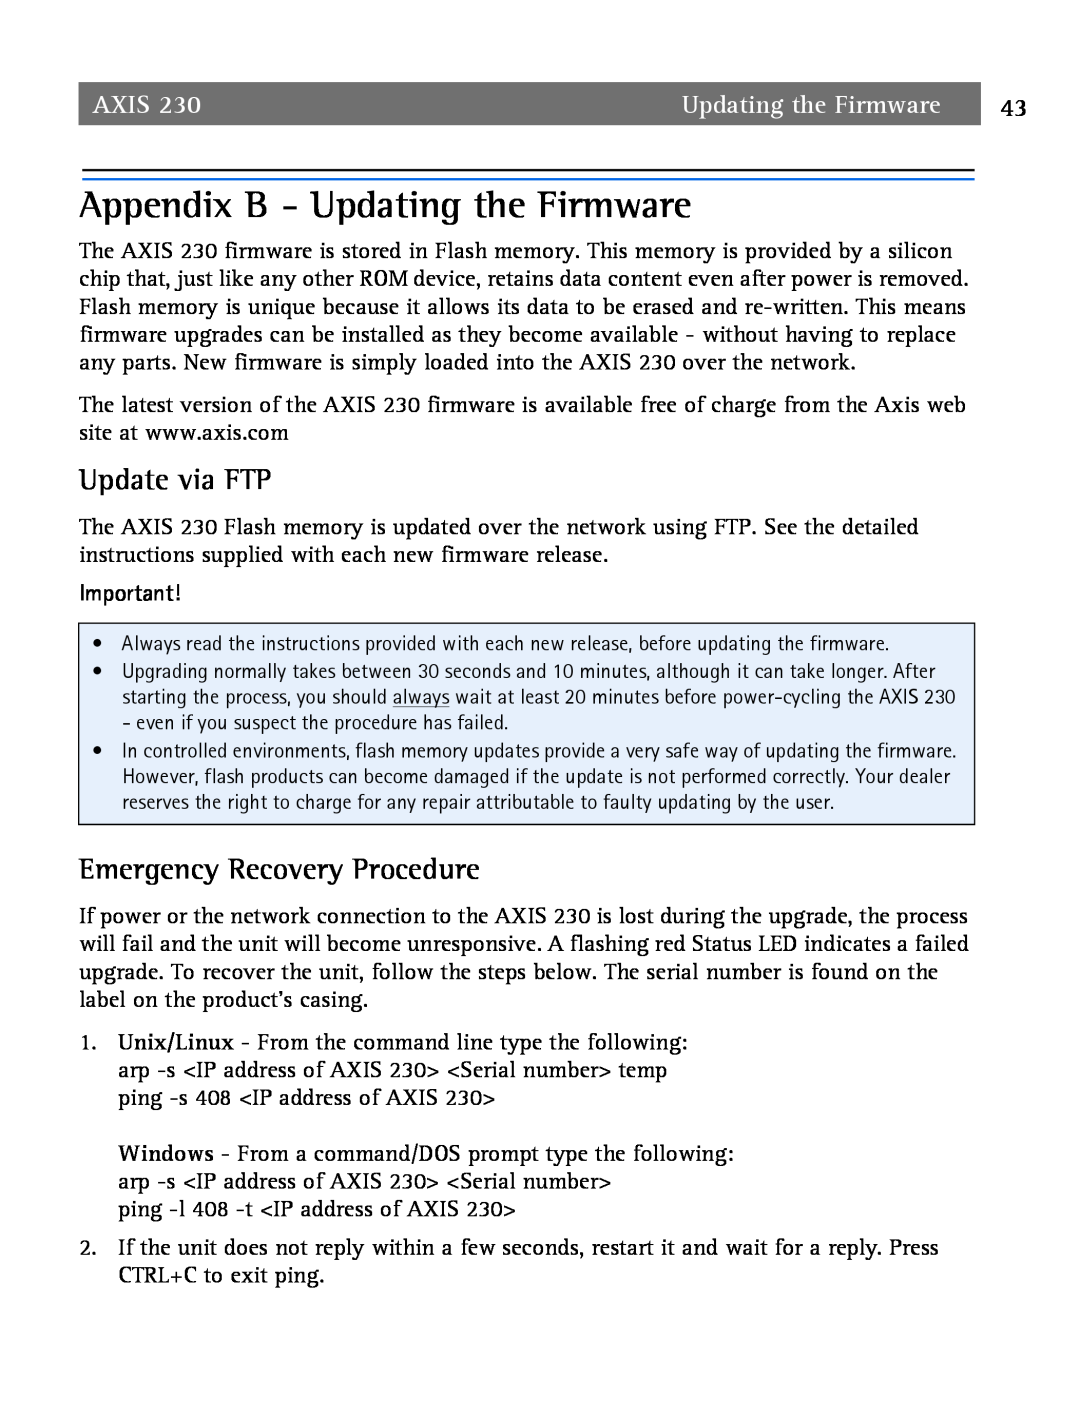 Axis Communications 2 user manual Appendix B - Updating the Firmware, Update via FTP, Emergency Recovery Procedure, Axis 